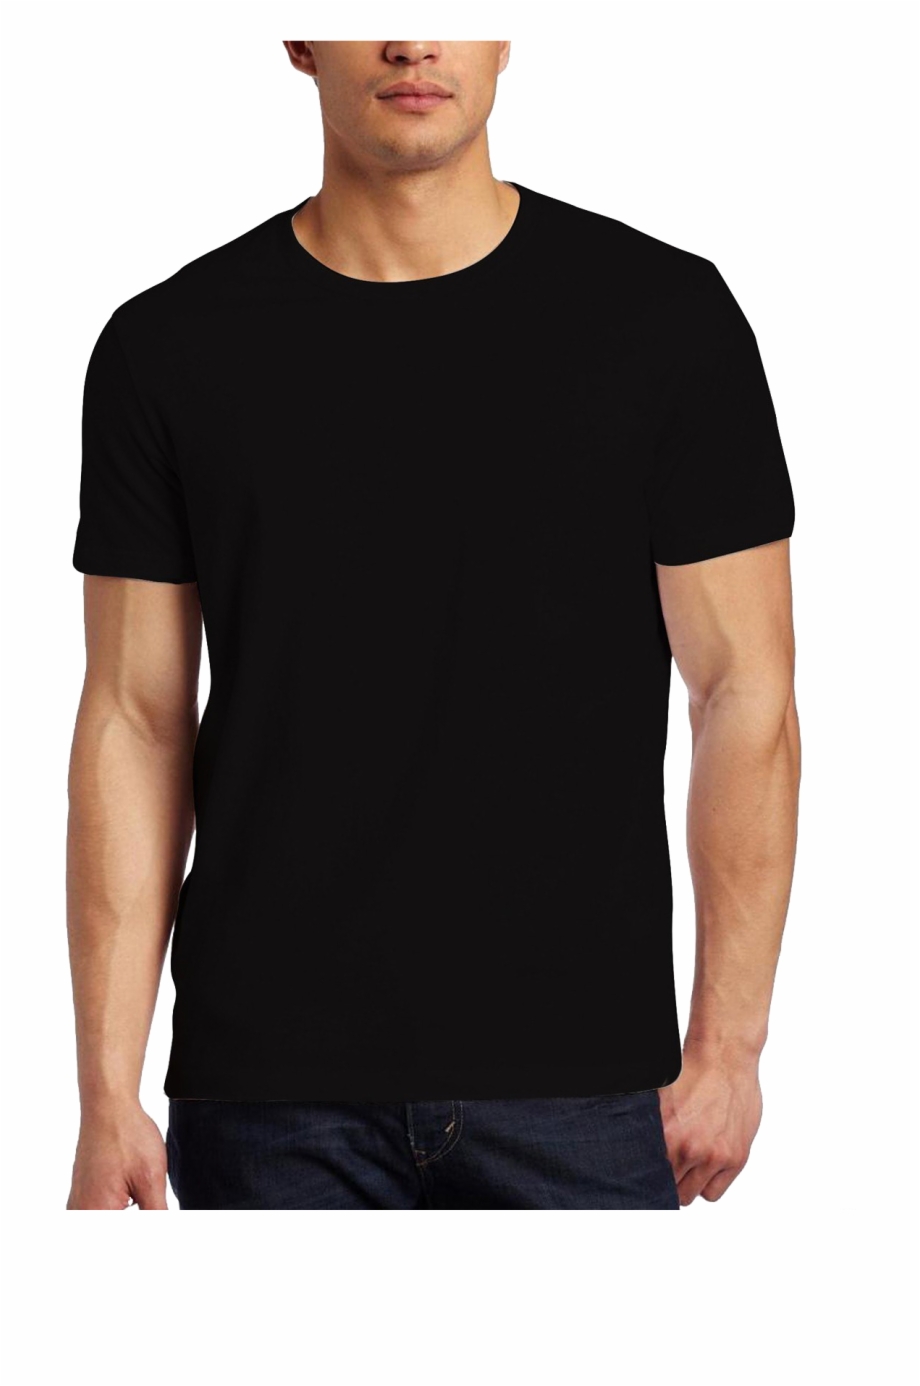 Black T Shirt Template Png Png Stock Com - how to make shirts on roblox without photoshop nils stucki